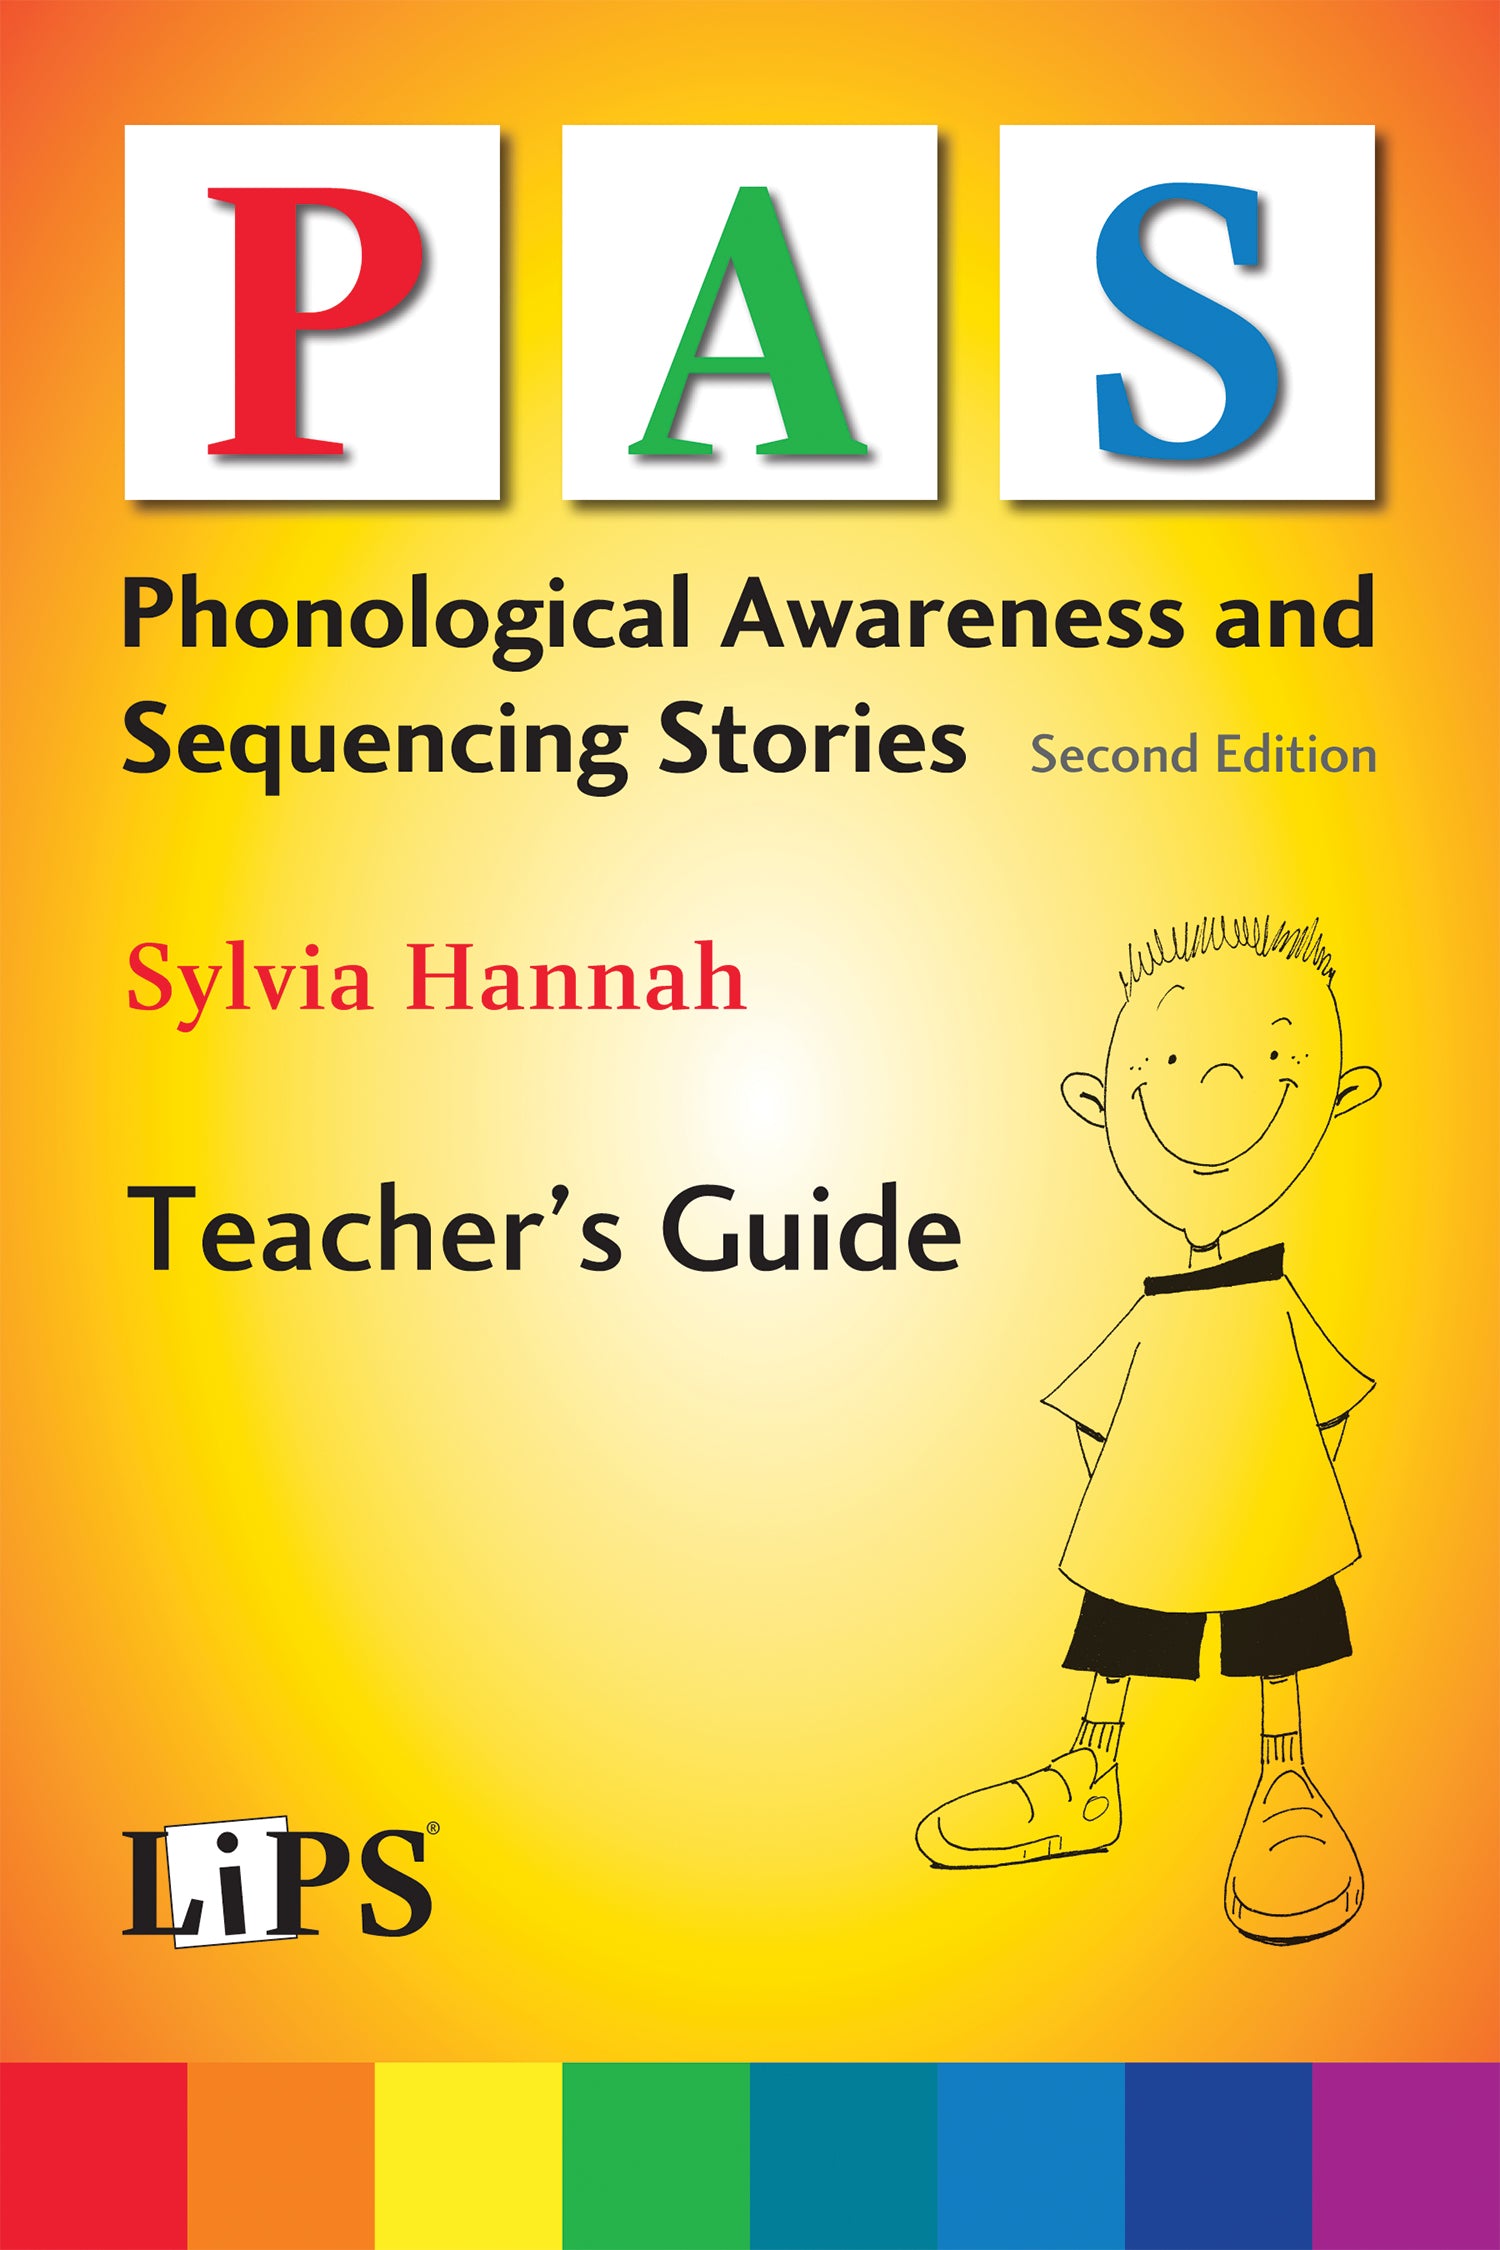 Phonological Awareness and Sequencing (PAS) Stories Teacher's Guide